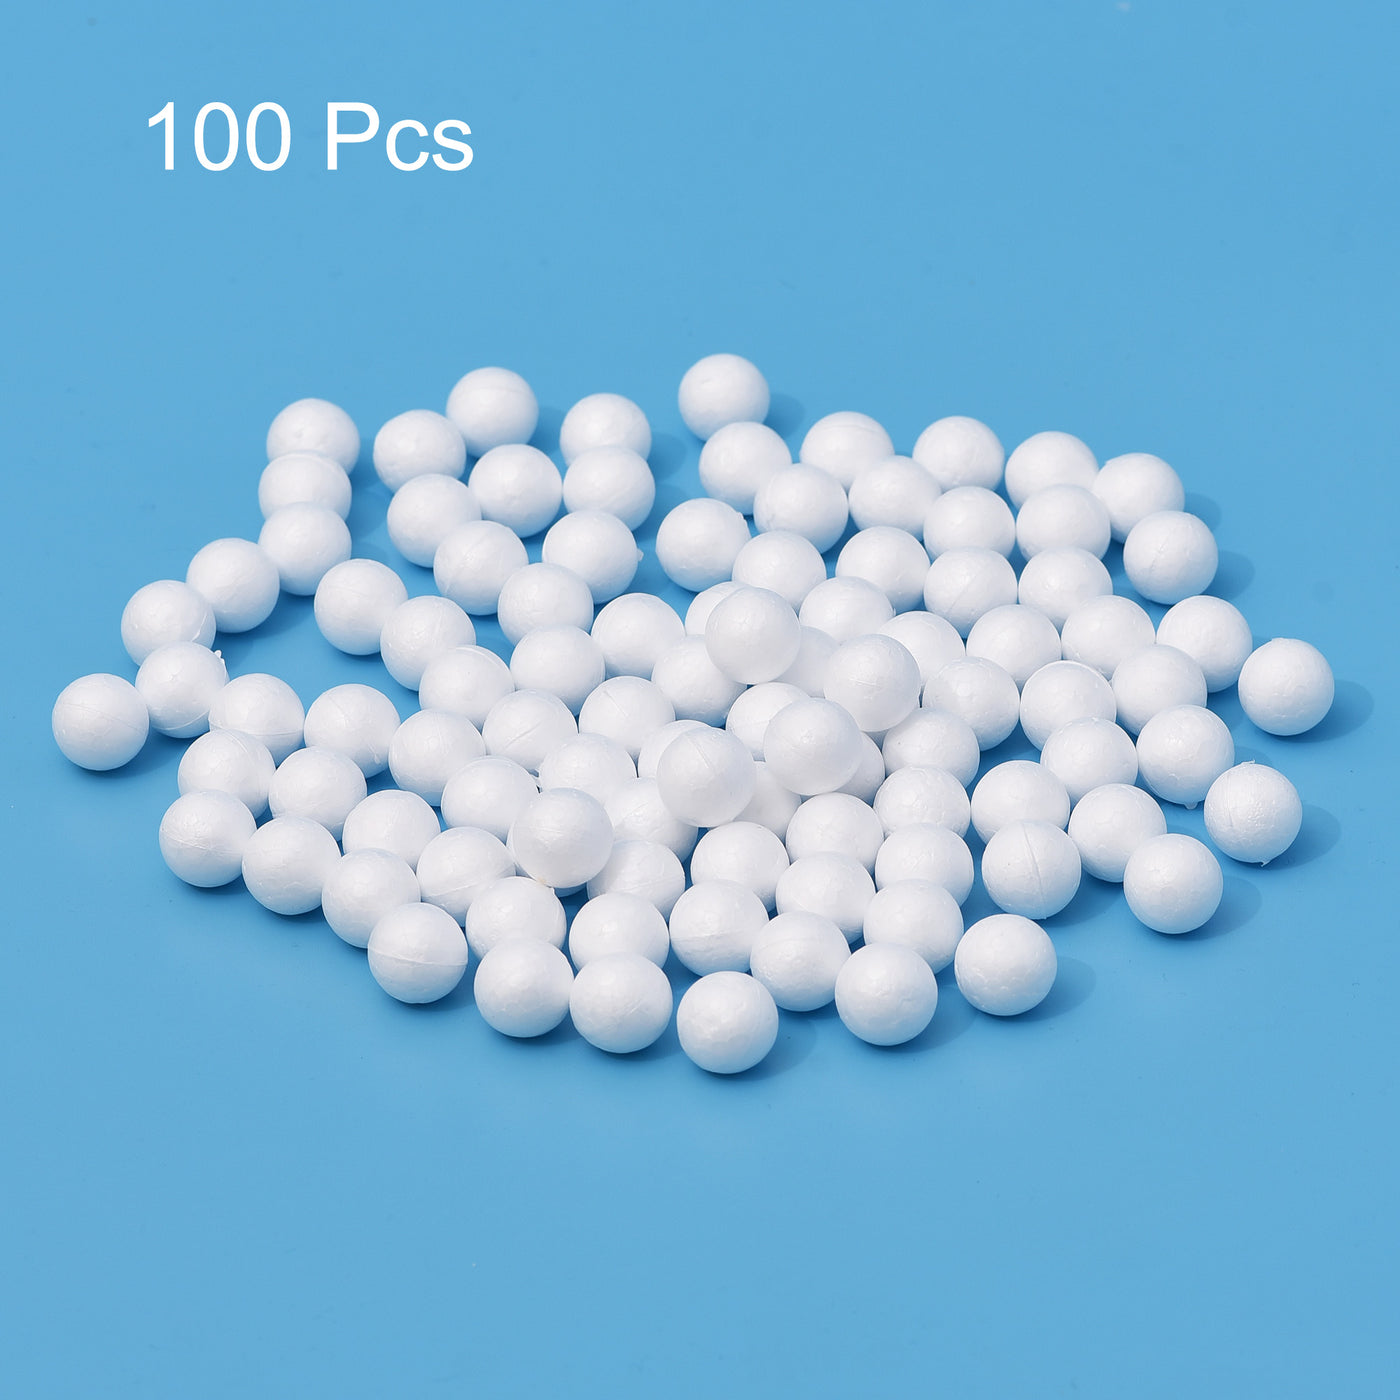 Uxcell Uxcell 100Pcs 1" White Polystyrene Foam Solid Balls for Crafts and Party Decorations